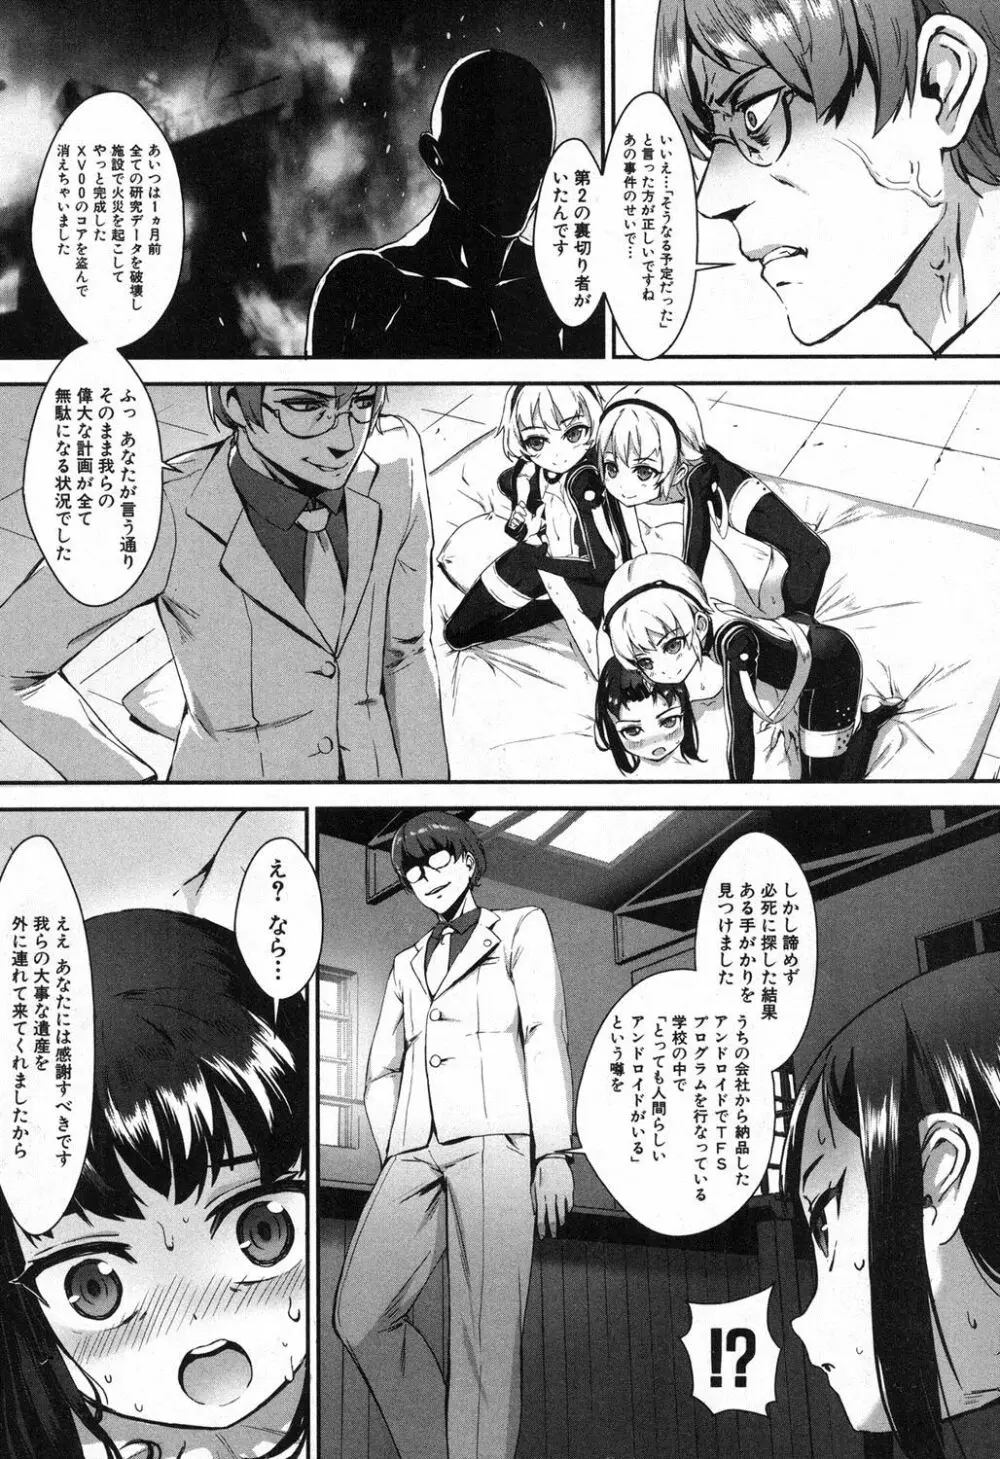 T.F.S 第1-4話 + 御負け PV Page.87